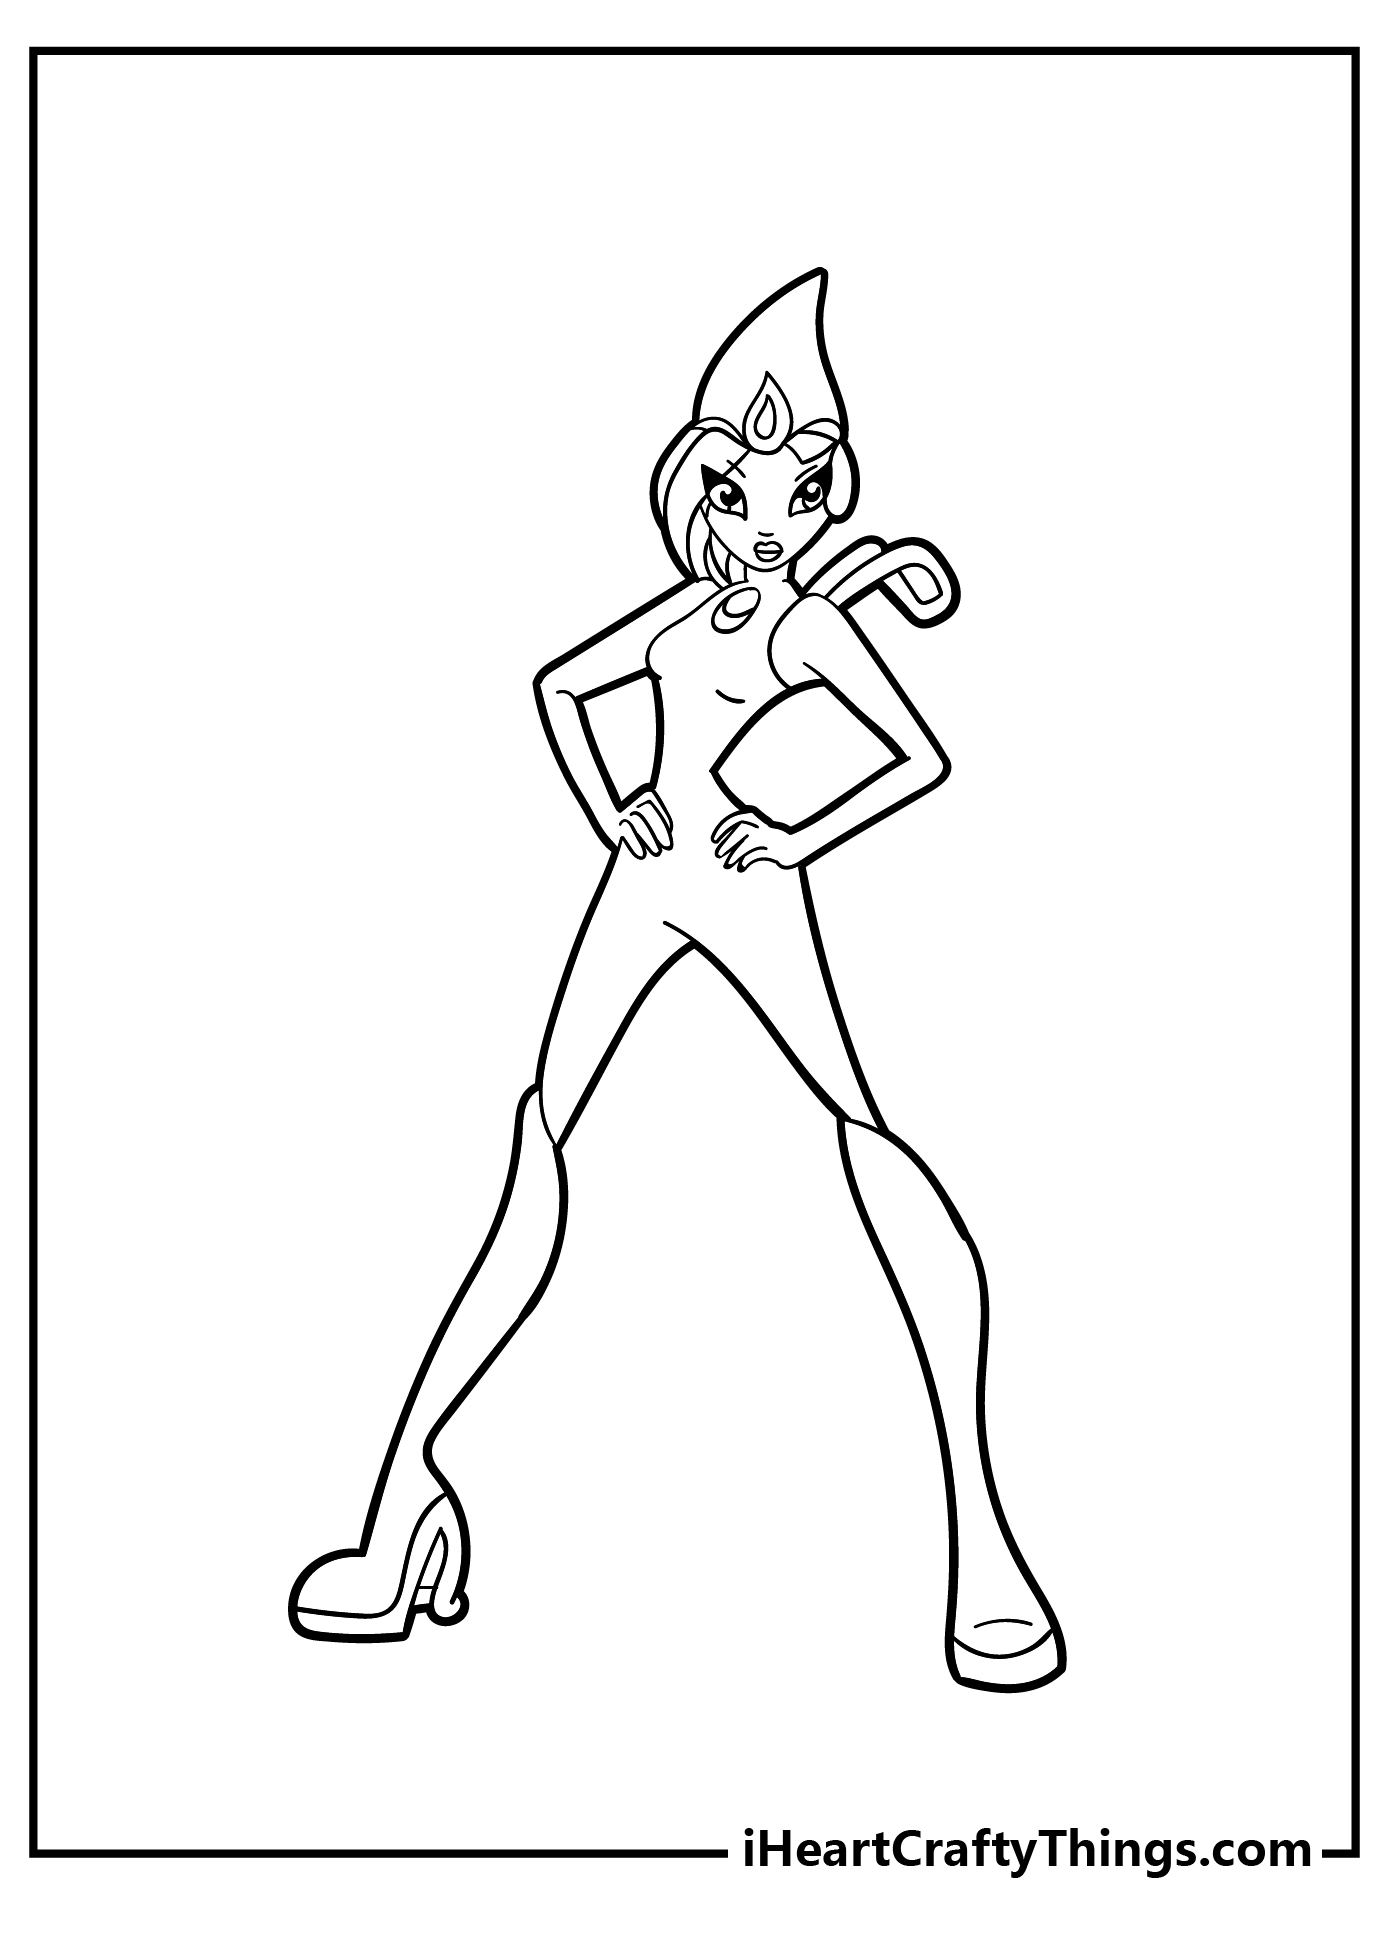 Winx Coloring Pages for preschoolers free printable